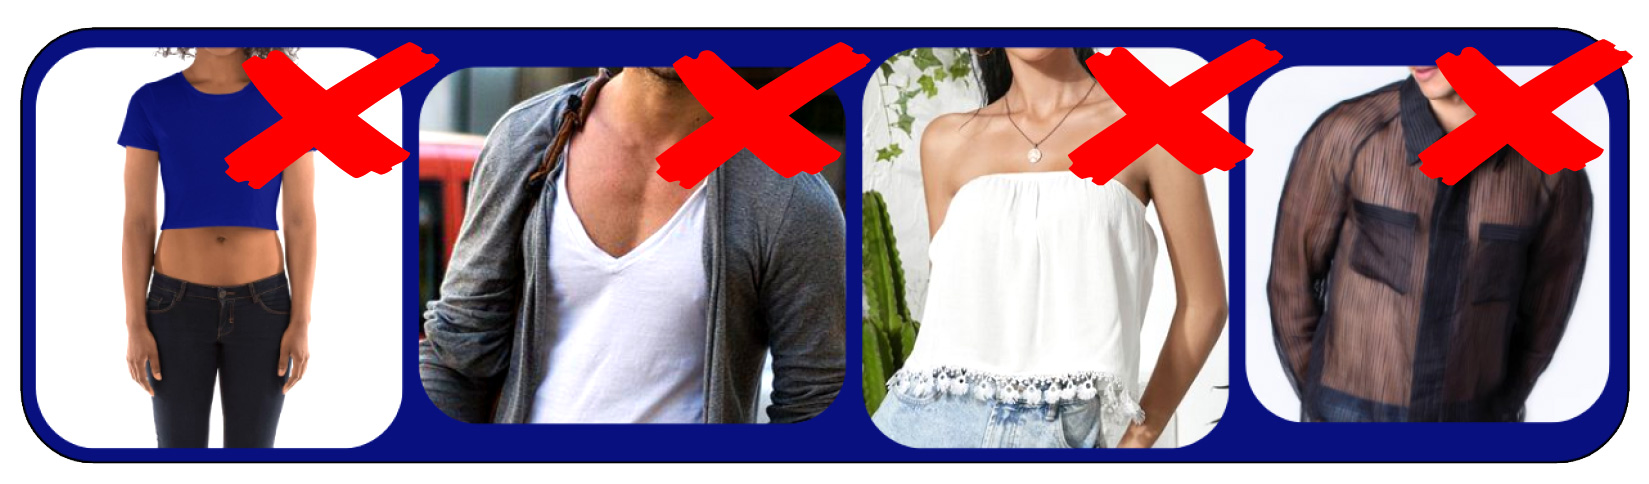 No see through, strapless, low cut, midriffs, spaghetti strap or racer back shirts allowed